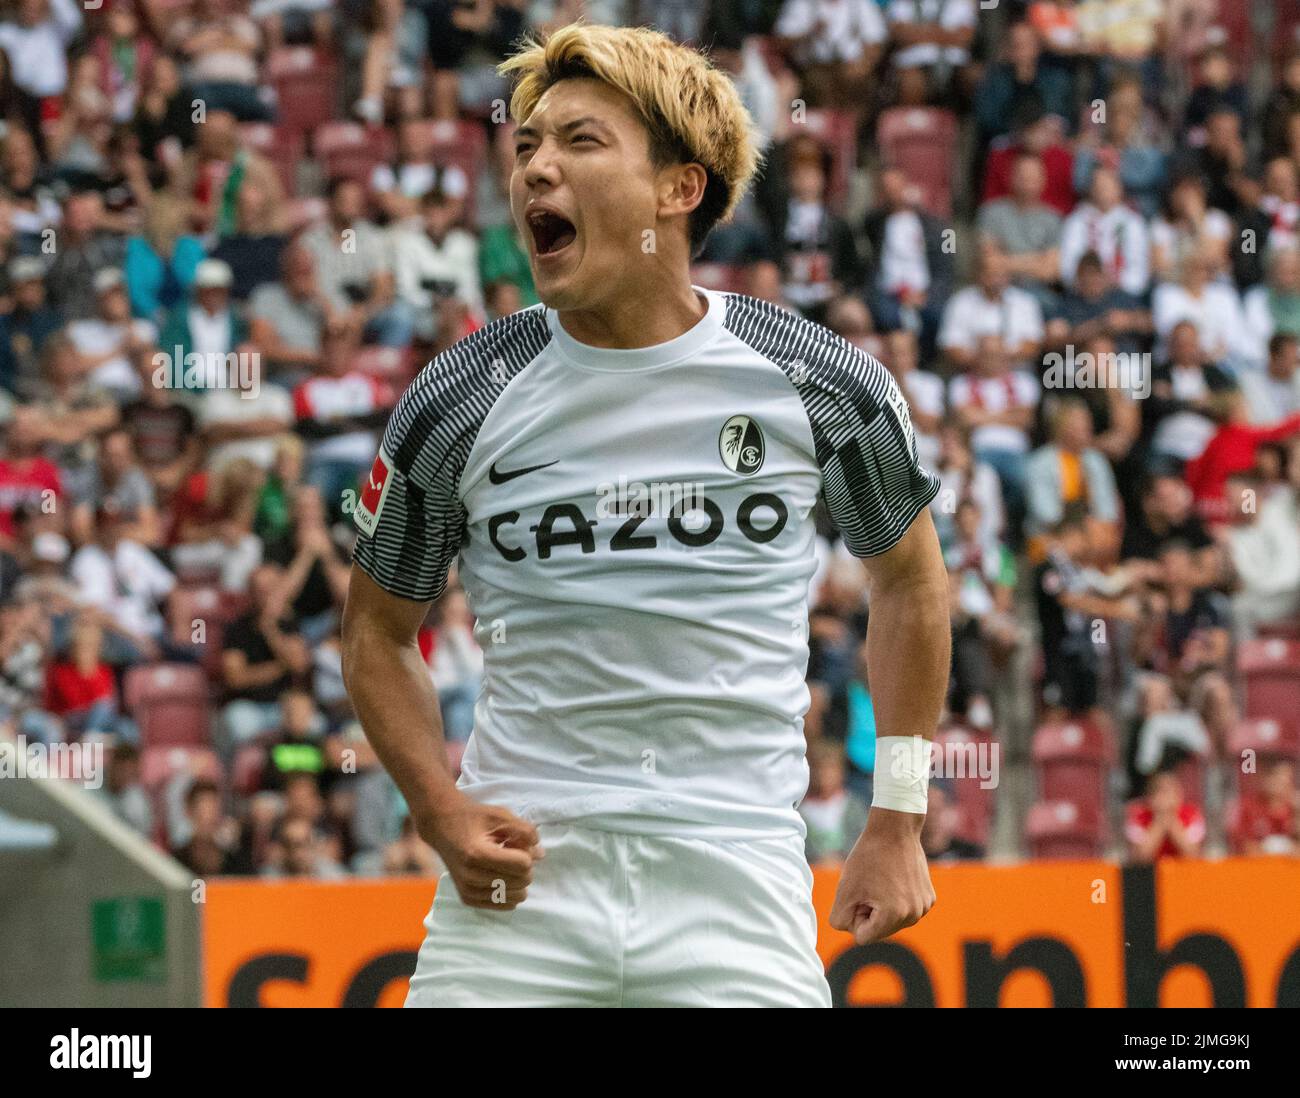 Augsburg, Germany. 06th Aug, 2022. Soccer, Bundesliga, FC Augsburg - SC Freiburg, Matchday 1, WWK-Arena. Freiburg's Ritsu Doan celebrates after his goal for 0:4. Credit: Stefan Puchner/dpa - IMPORTANT NOTE: In accordance with the requirements of the DFL Deutsche Fußball Liga and the DFB Deutscher Fußball-Bund, it is prohibited to use or have used photographs taken in the stadium and/or of the match in the form of sequence pictures and/or video-like photo series./dpa/Alamy Live News Stock Photo